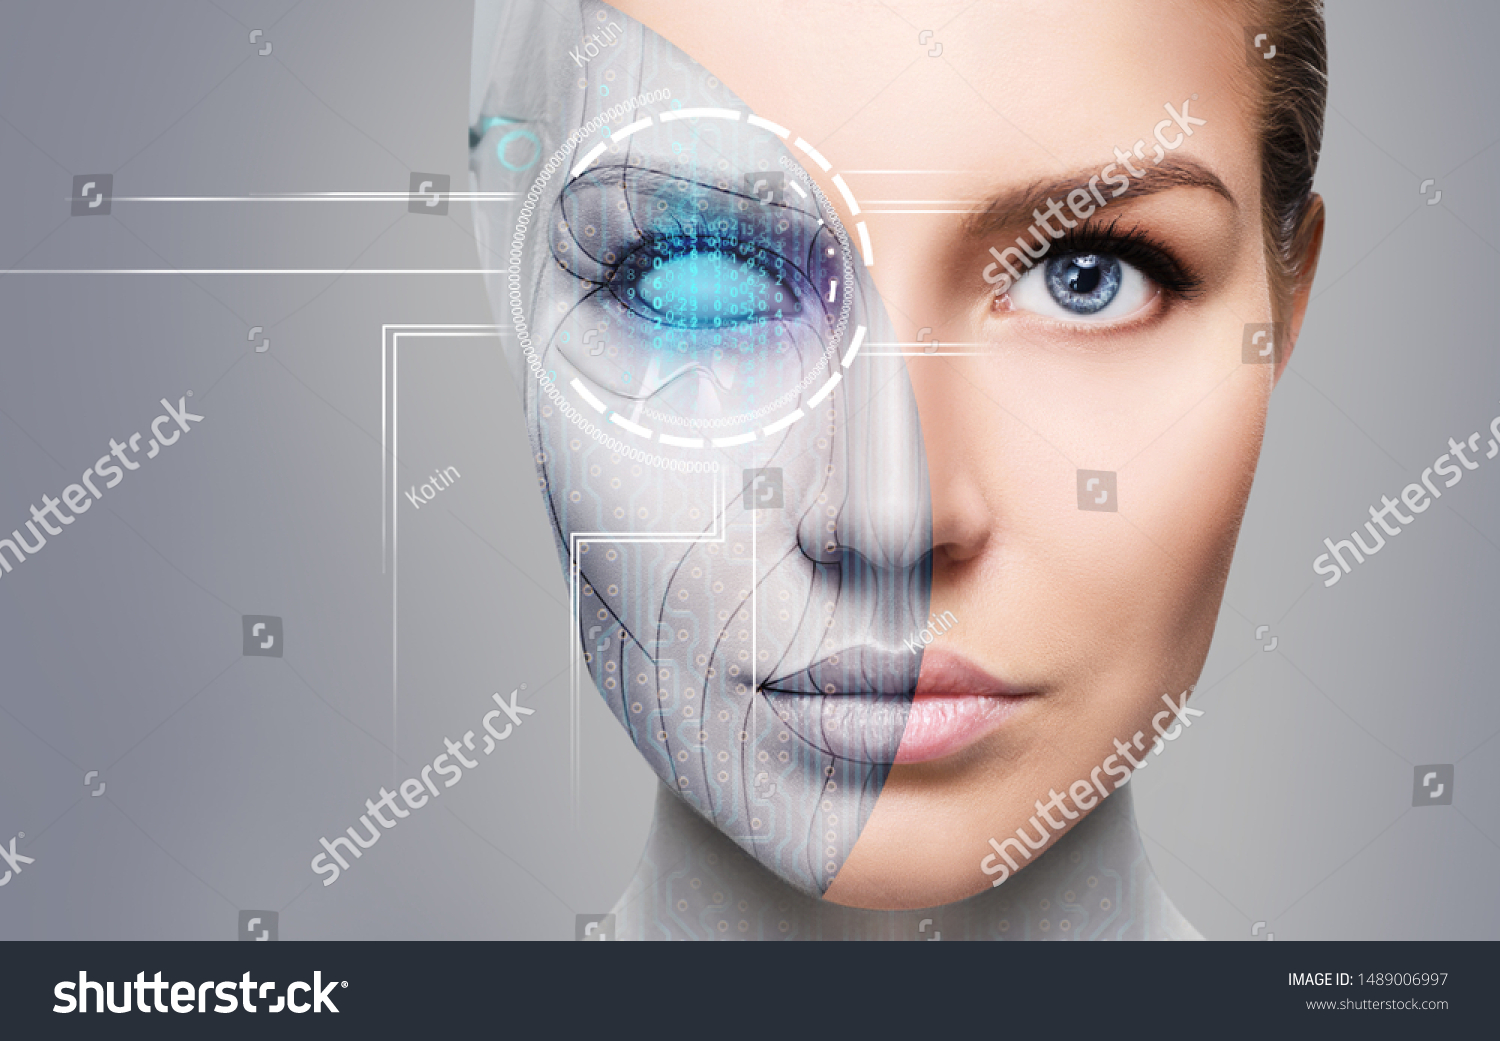 Cyborg woman with machine part of her face. Over gray background. #1489006997